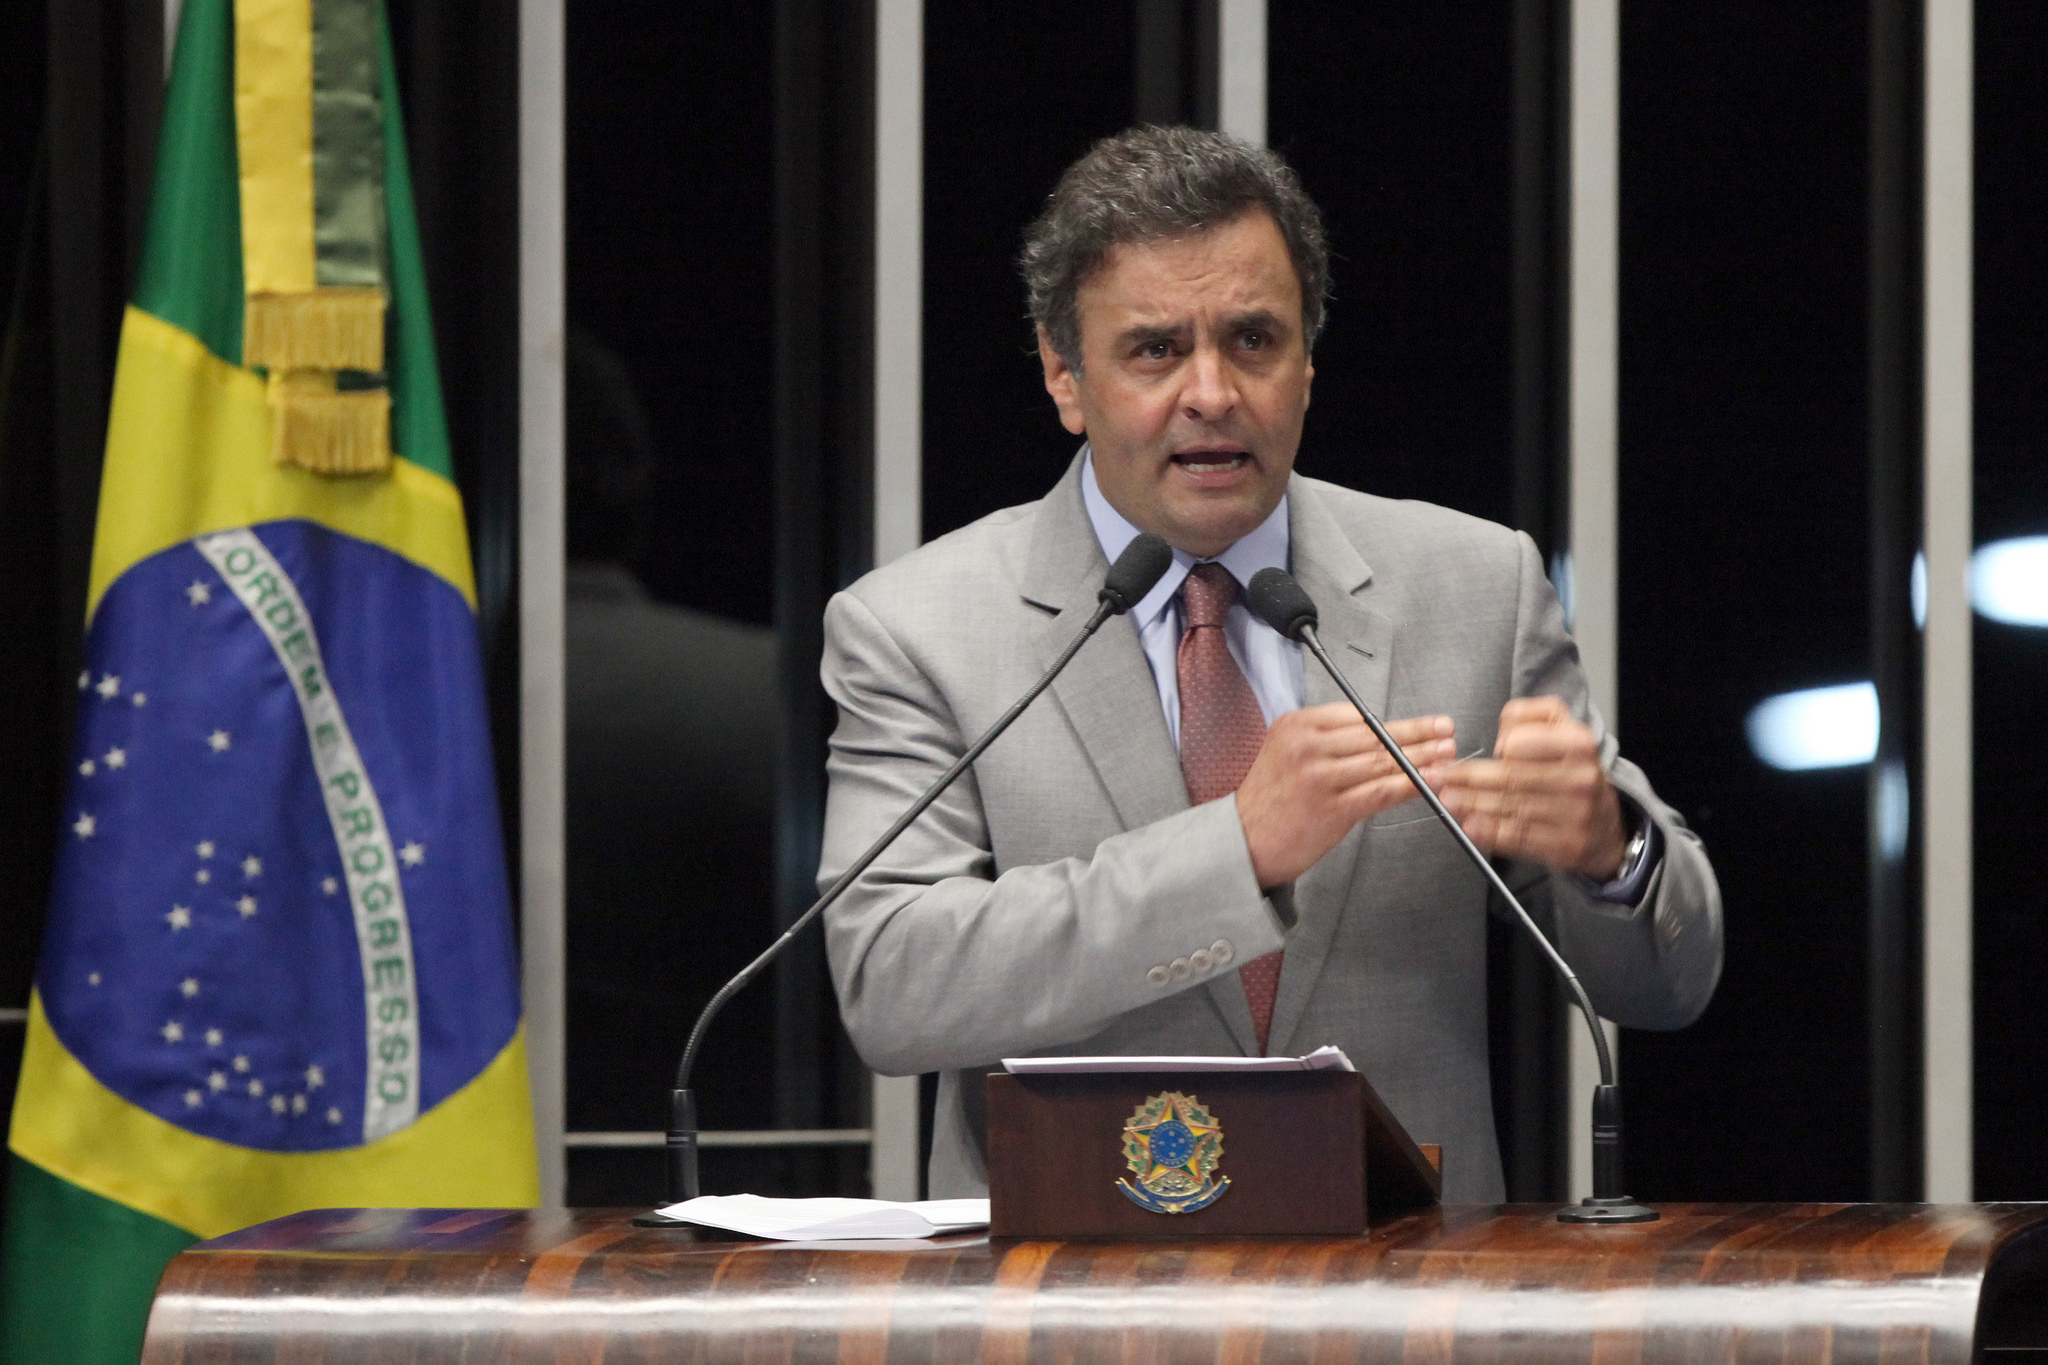 Presidential candidate, Aécio Neves from PSDB Image by: George Gianni/PSDB. Taken from: https://www.flickr.com/photos/psdbminasgerais/9142079303  